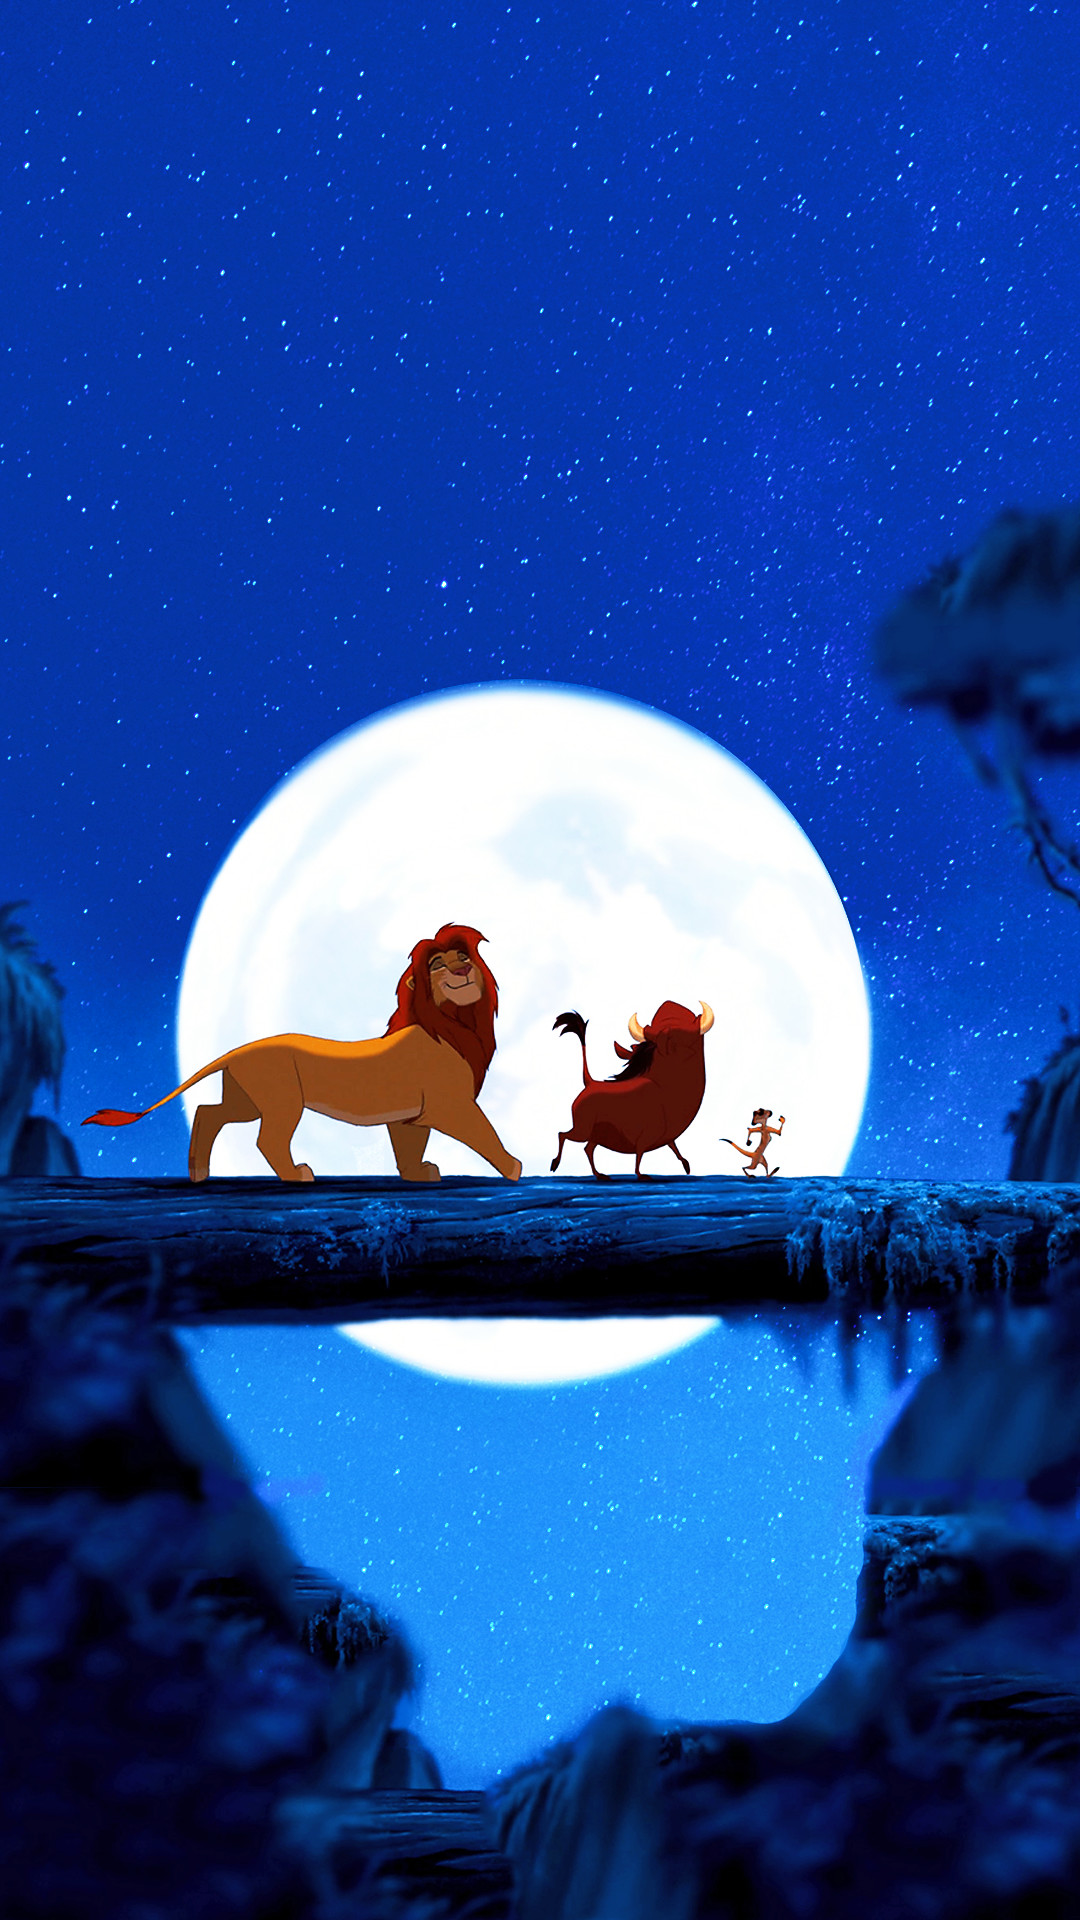 1080x1920 The Lion King background - you can find the rest on my website -